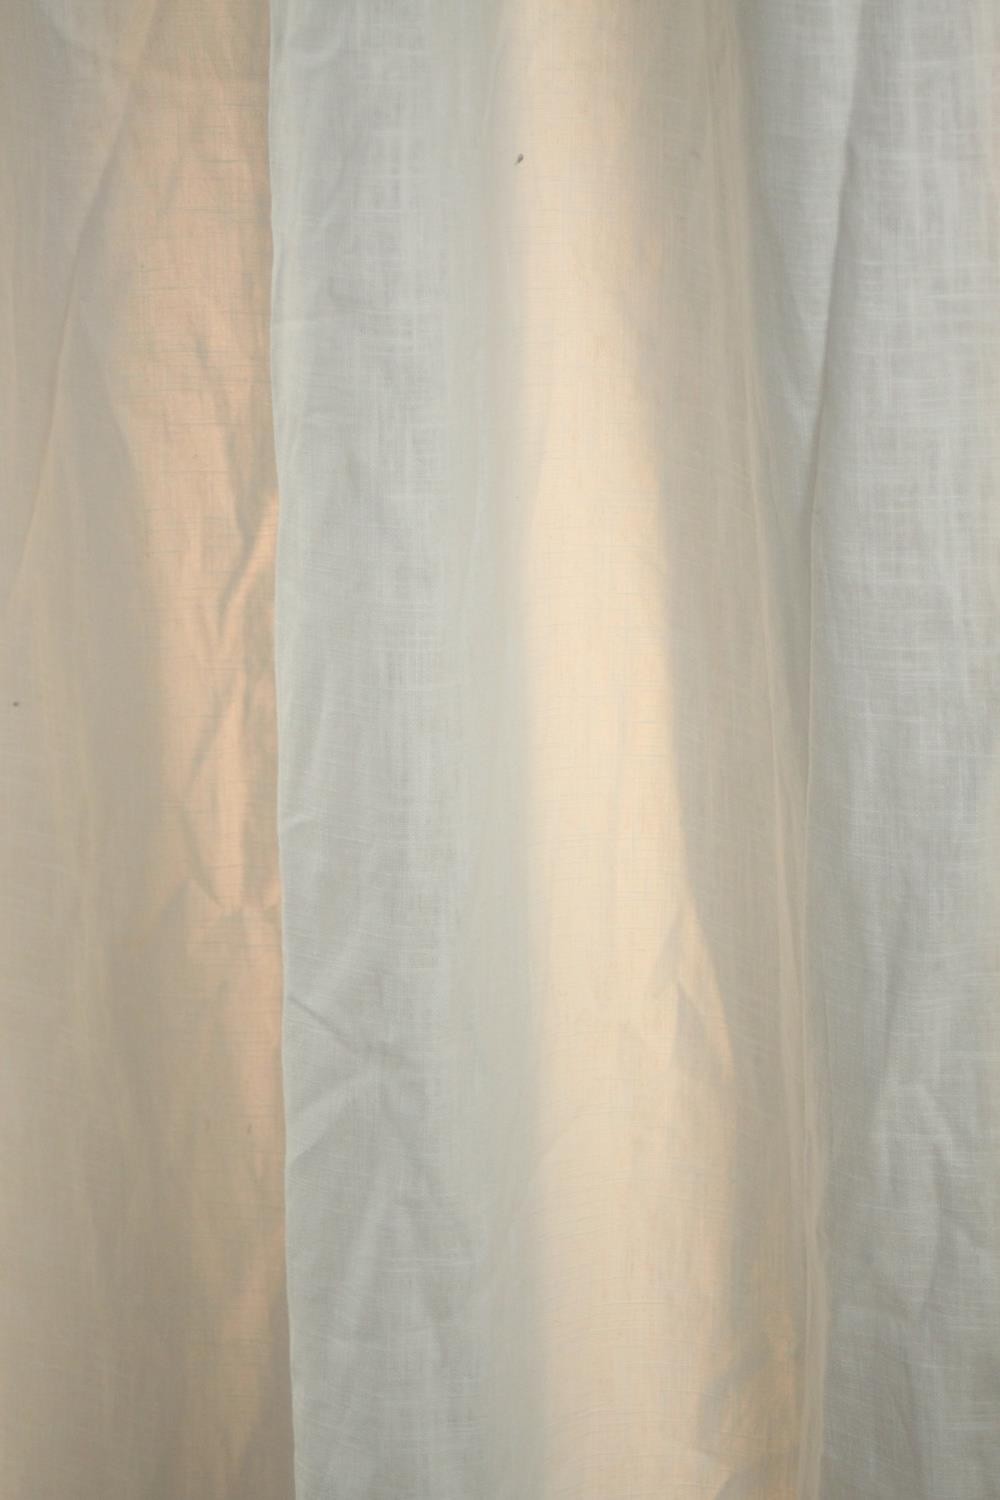 A pleated thin white curtain. L.250 W.260cm. - Image 5 of 5